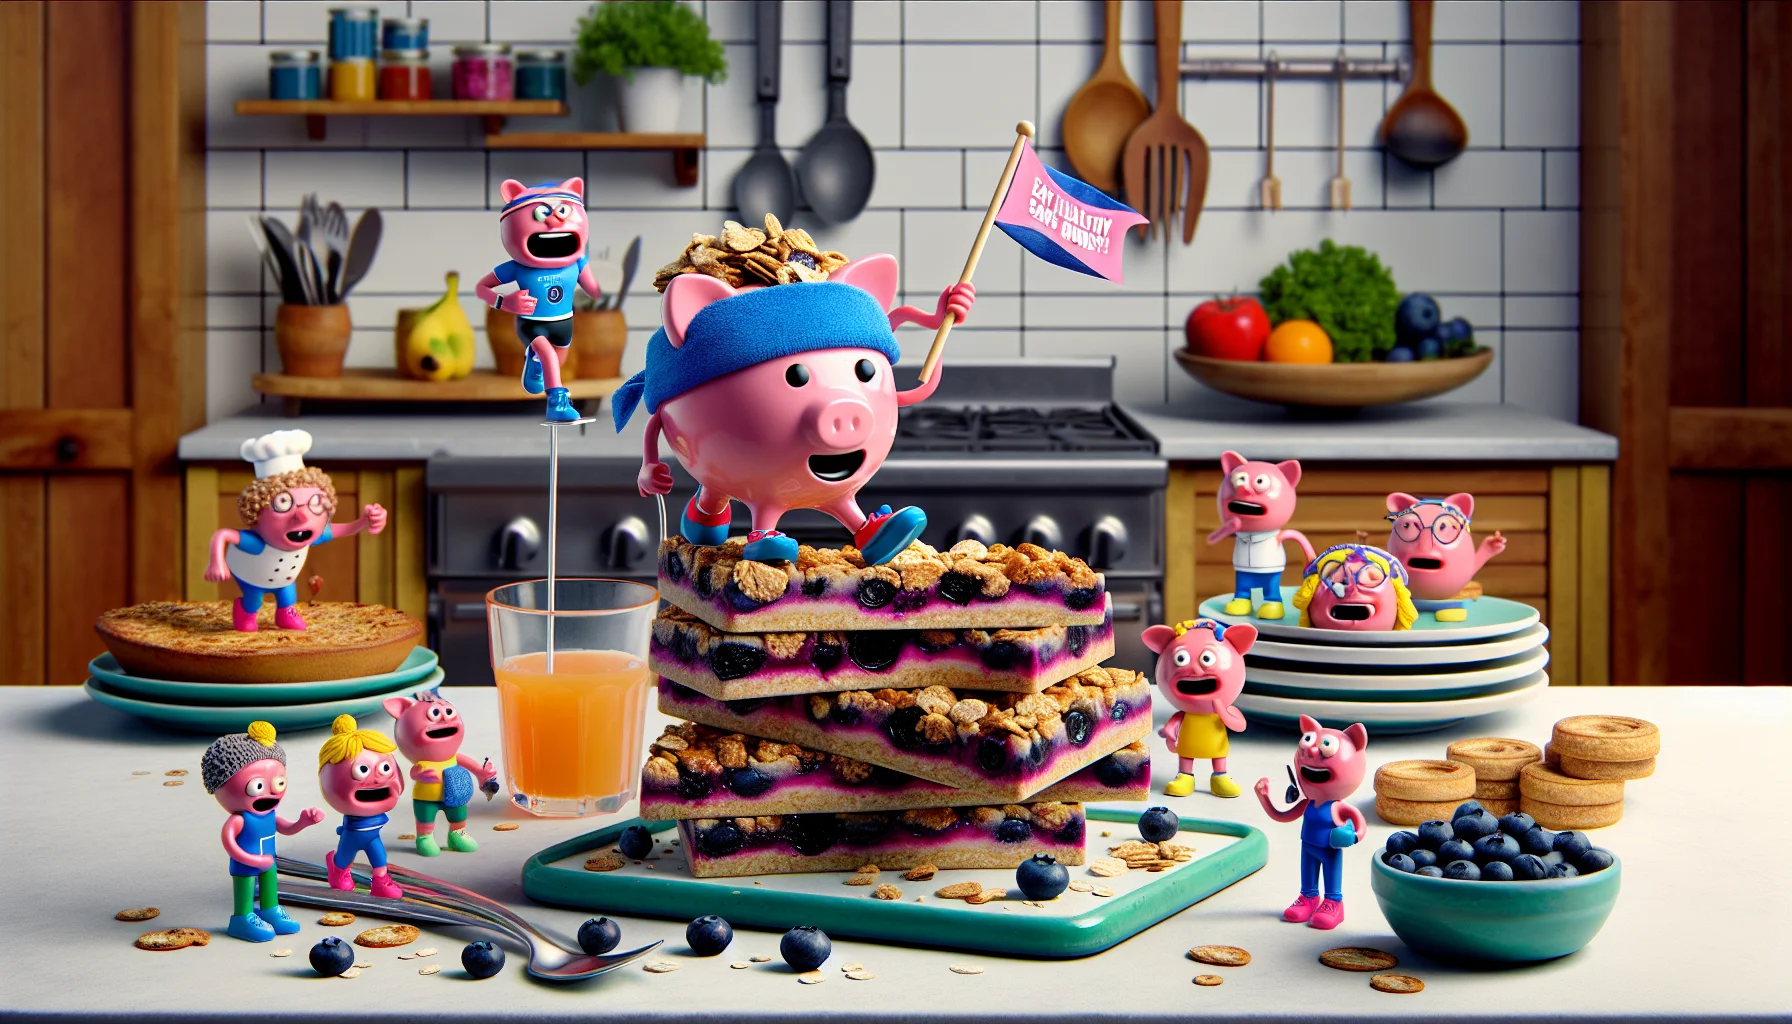 Imagine an animated and colorful scene set in a modern kitchen. On the kitchen bench, see a stack of scrumptious, realistic-looking blueberry breakfast bars, each oozing with fresh blueberries and topped with oat crumble. A humorous scenario unfolds as a pink piggy bank in the shape of a fitness enthusiast, complete with a headband and running shoes, is balancing on top of the stack, holding a flag that says 'Eat Healthy, Save Money!'. A variety of playful, cartoon-like, facial expressions are conveyed by the pieces of cutlery and plates, all reacting in a surprised and excited way to the unusual spectacle.